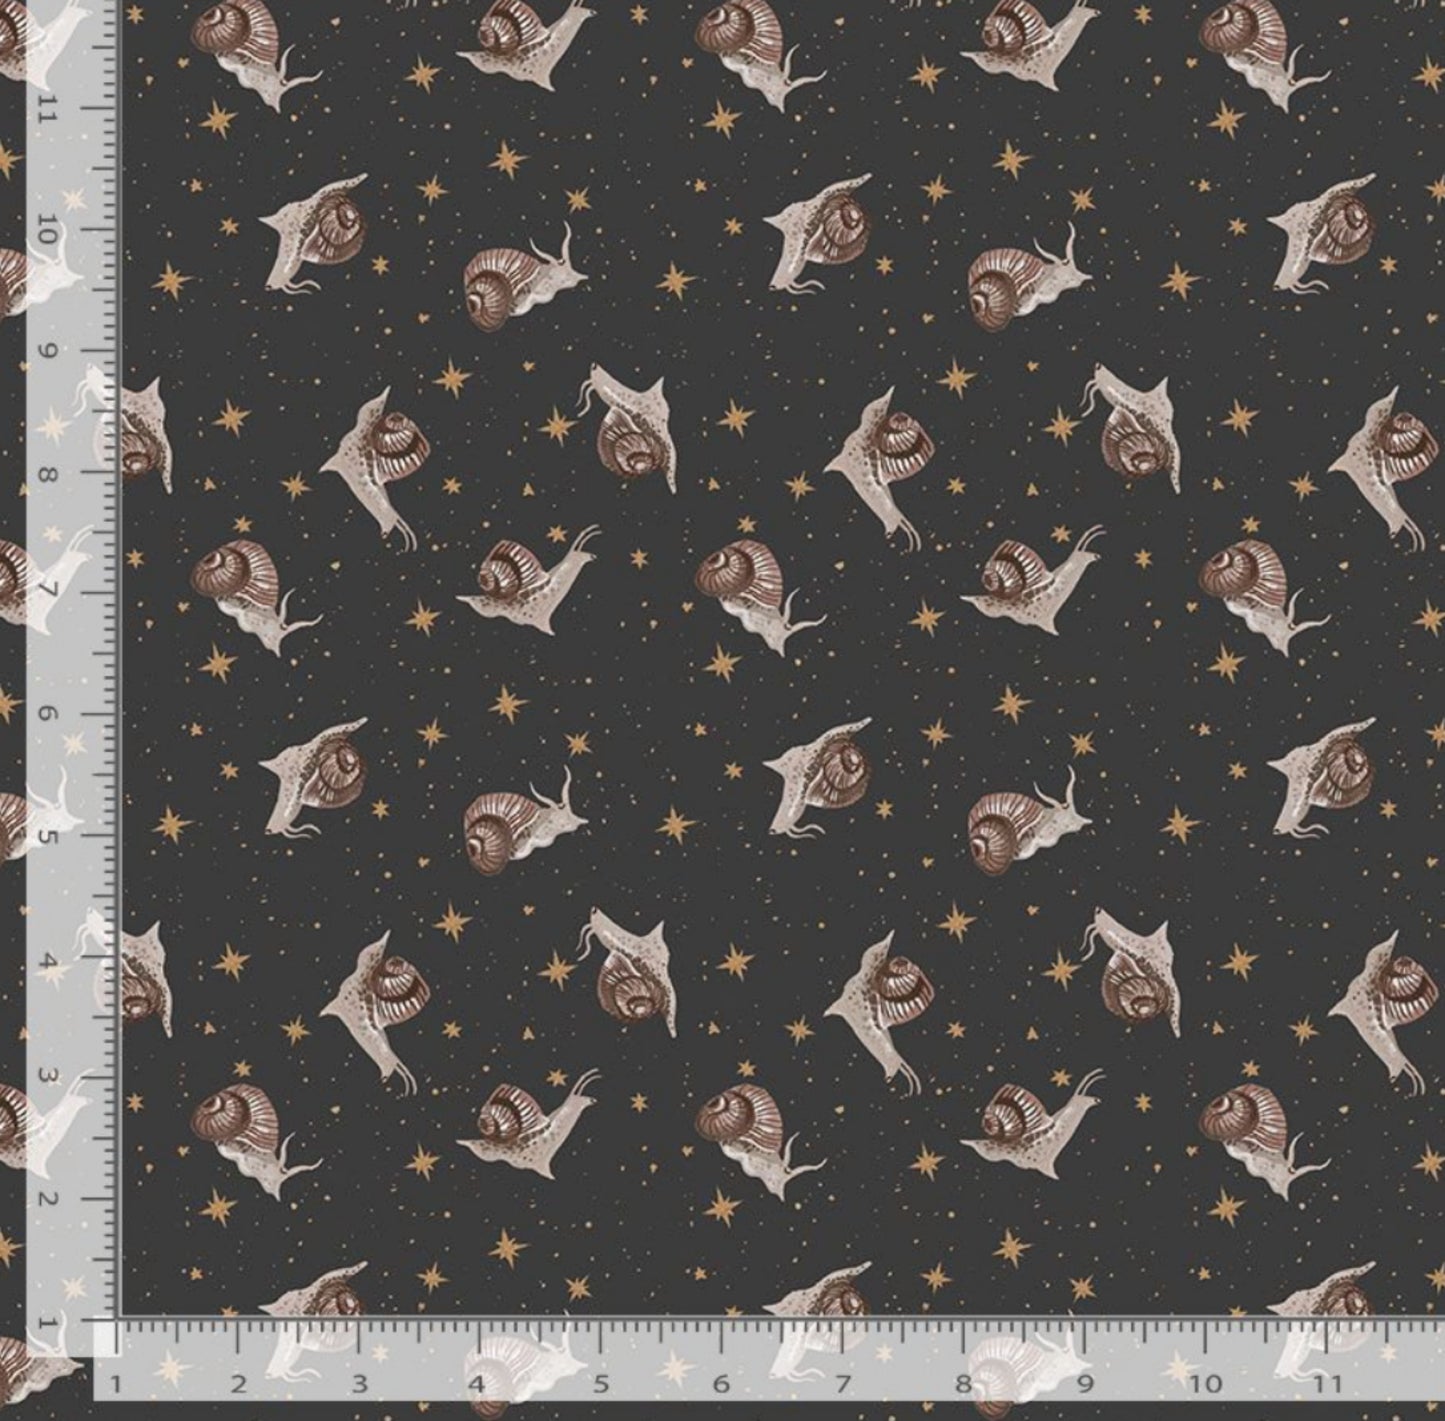 Snails - Goblincore Collection by Rae Ritchie for Dear Stella Fabrics - DRR2541 - Carbon